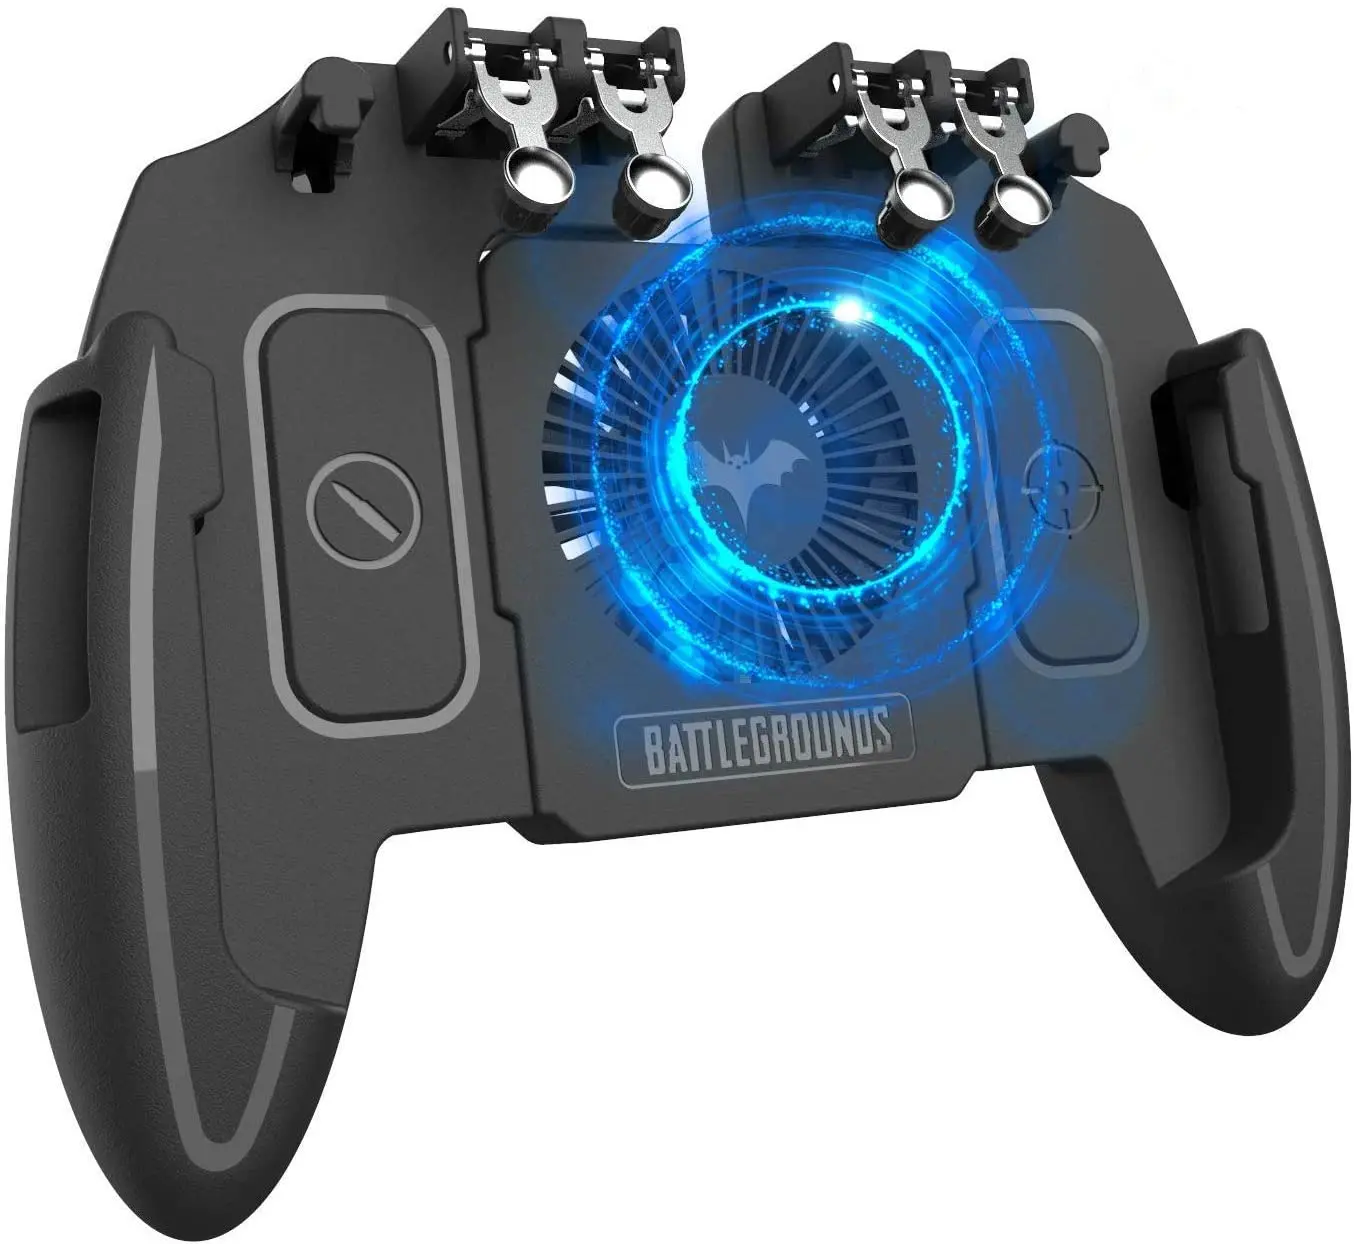 Verwaand Pakistaans Heel boos 6 Finger Operation] L1r1 L2r2 Gaming Grip Gamepad Mobile Controller Trigger  For 4.7-6.5" Ios Android Phone - Buy Mobile Game Controller With Cooling  Fan 4 Trigger For Pubg/call Of Duty/fotnite,Pubg Mobile Joystick